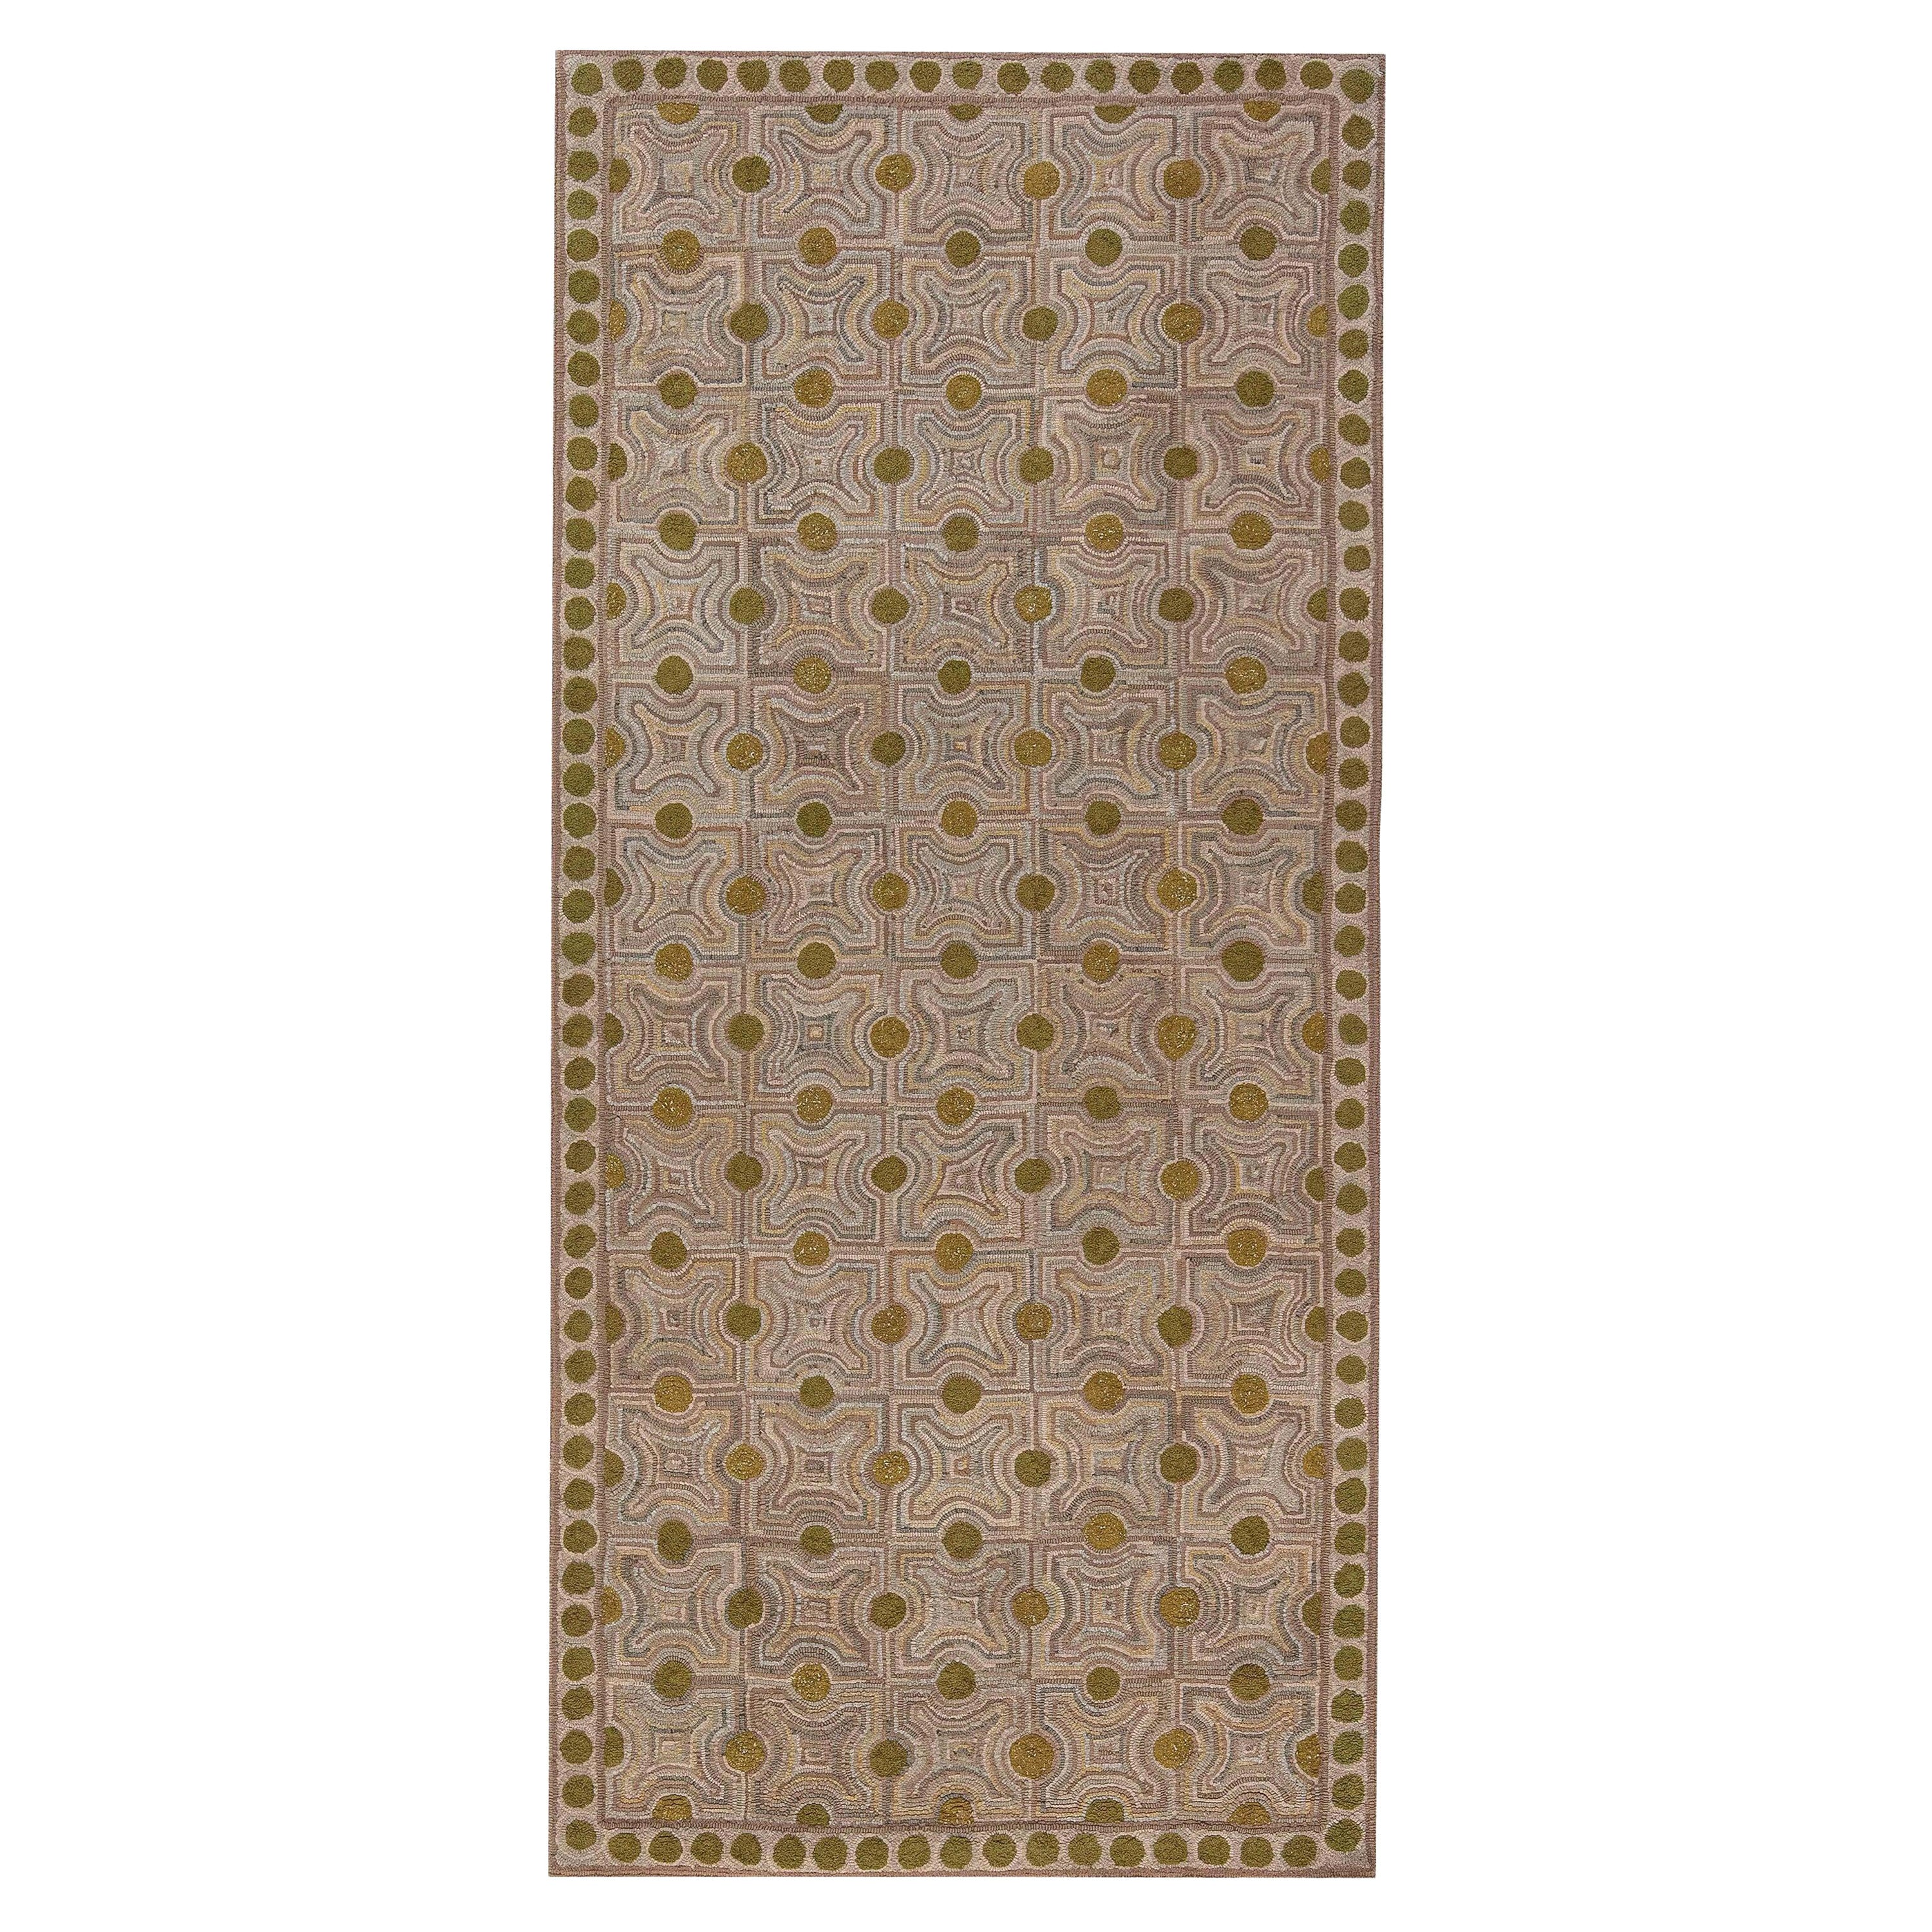 Contemporary Custom Hook Rug in Beige, Green and Taupe by Doris Leslie Blau For Sale